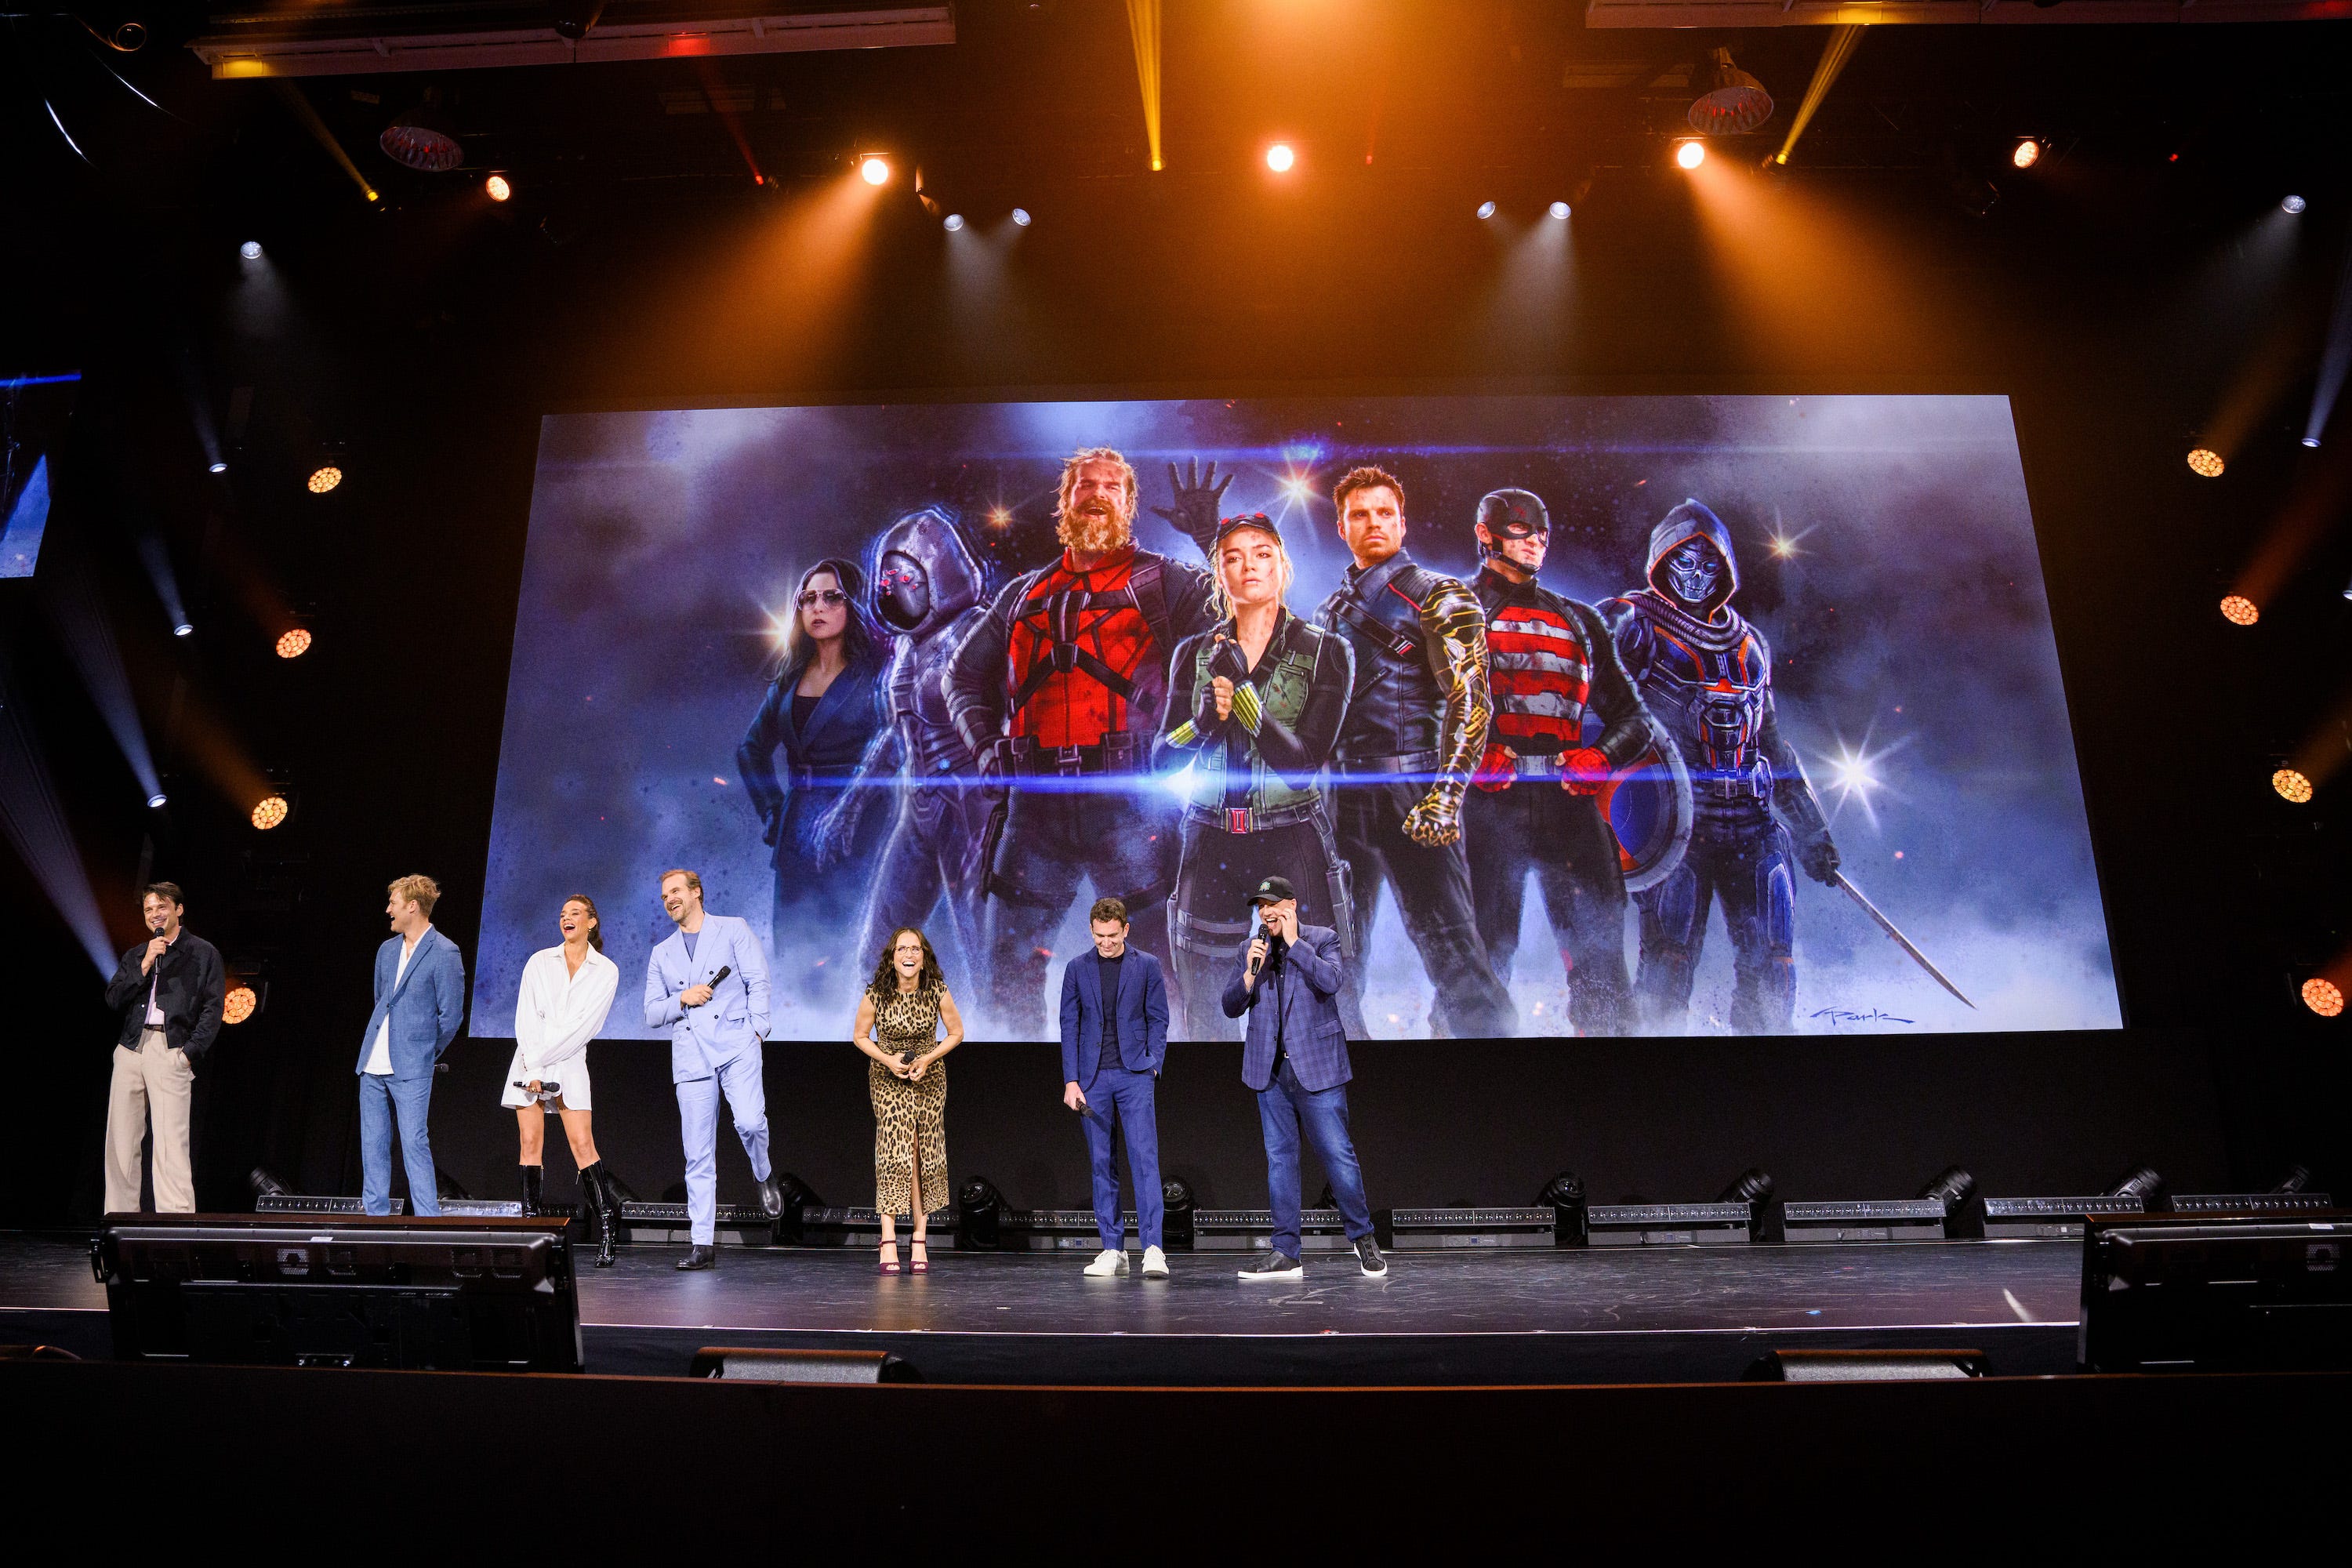 <p>"There's currently a world without the Avengers," Feige said at D23 Expo of the state of the MCU in the next "Captain America" film. "Just because there is not an organization of the Avengers, doesn't mean there's not a group of superheroes in the MCU."</p><p>The ragtag bunch of antiheroes includes a group of characters we've seen introduced in various movies and Disney+ shows. Bucky Barnes/The Winter Soldier (Sebastian Stan), US Agent (Wyatt Russell), Ghost (Hannah John-Kamen), Red Guardian (David Harbour), Contessa Valentina Allegra de Fontaine (Julia Louis-Dreyfus), Taskmaster (Olga Kurylenko), and Yelena Belova (Florence Pugh) will all star in the upcoming movie. The group basically seems like Marvel's version of the Suicide Squad.</p><p>"It's good to be back. I'm as excited as the most boring Avenger," Russell joked about returning to the MCU.</p><p>"They look like a good, troubled bunch and maybe I know a thing or two about that," Stan, whose character has dealt with a lot of PTSD said about Bucky being a part of a group again.</p><p>"I think it tells you all you need to know about the Thunderbolts when beloved Winter Soldier is the most stable among them," Feige said.</p>